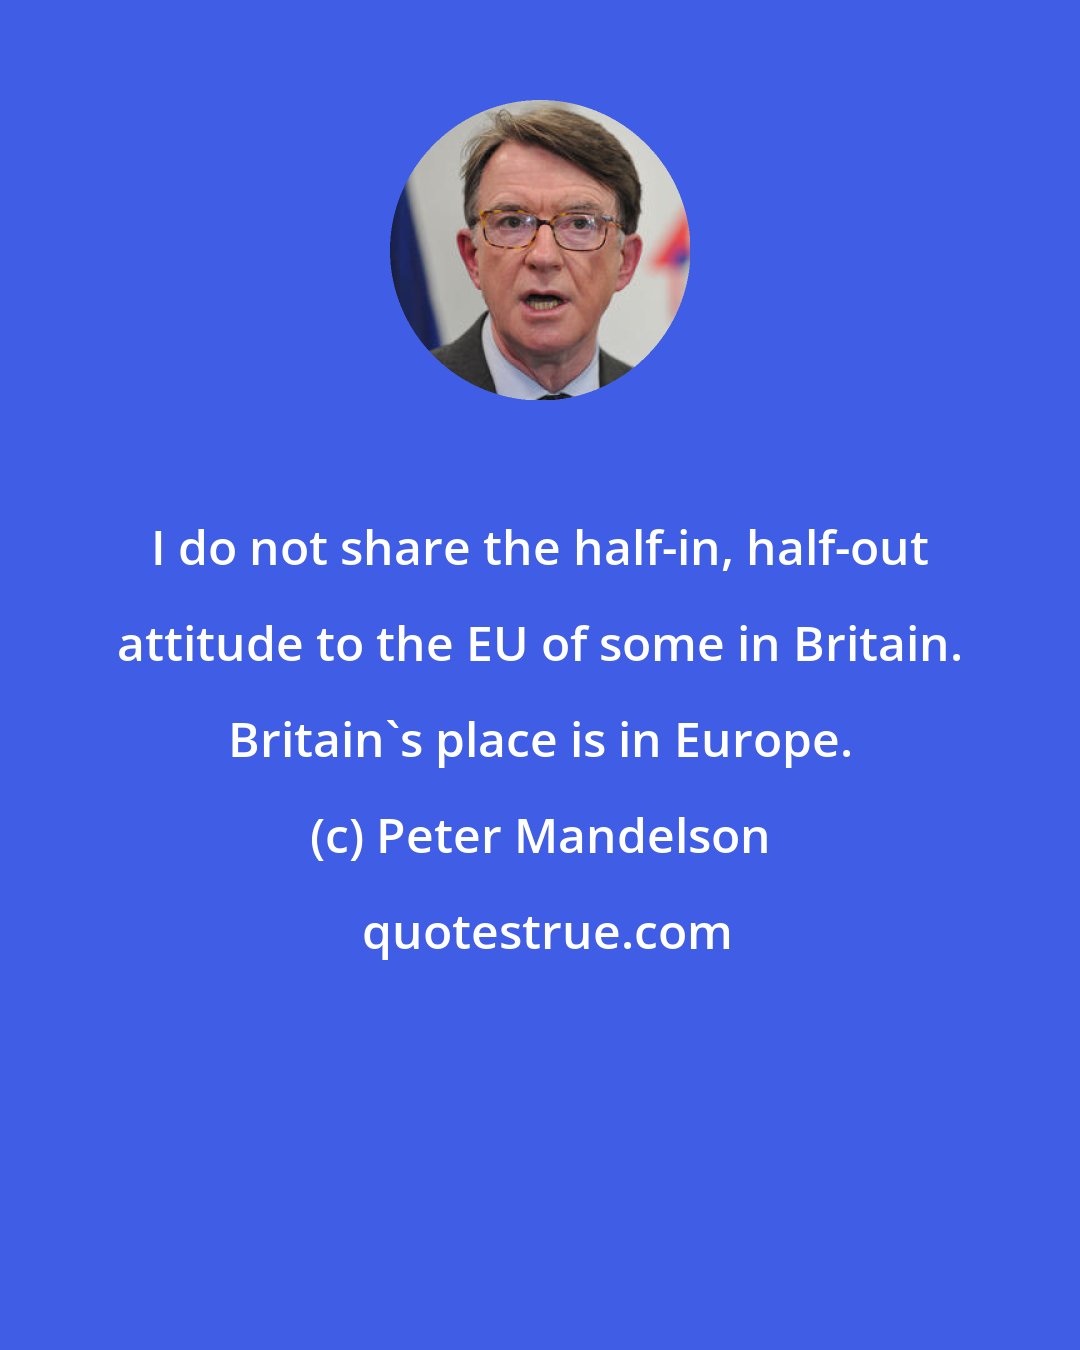 Peter Mandelson: I do not share the half-in, half-out attitude to the EU of some in Britain. Britain's place is in Europe.